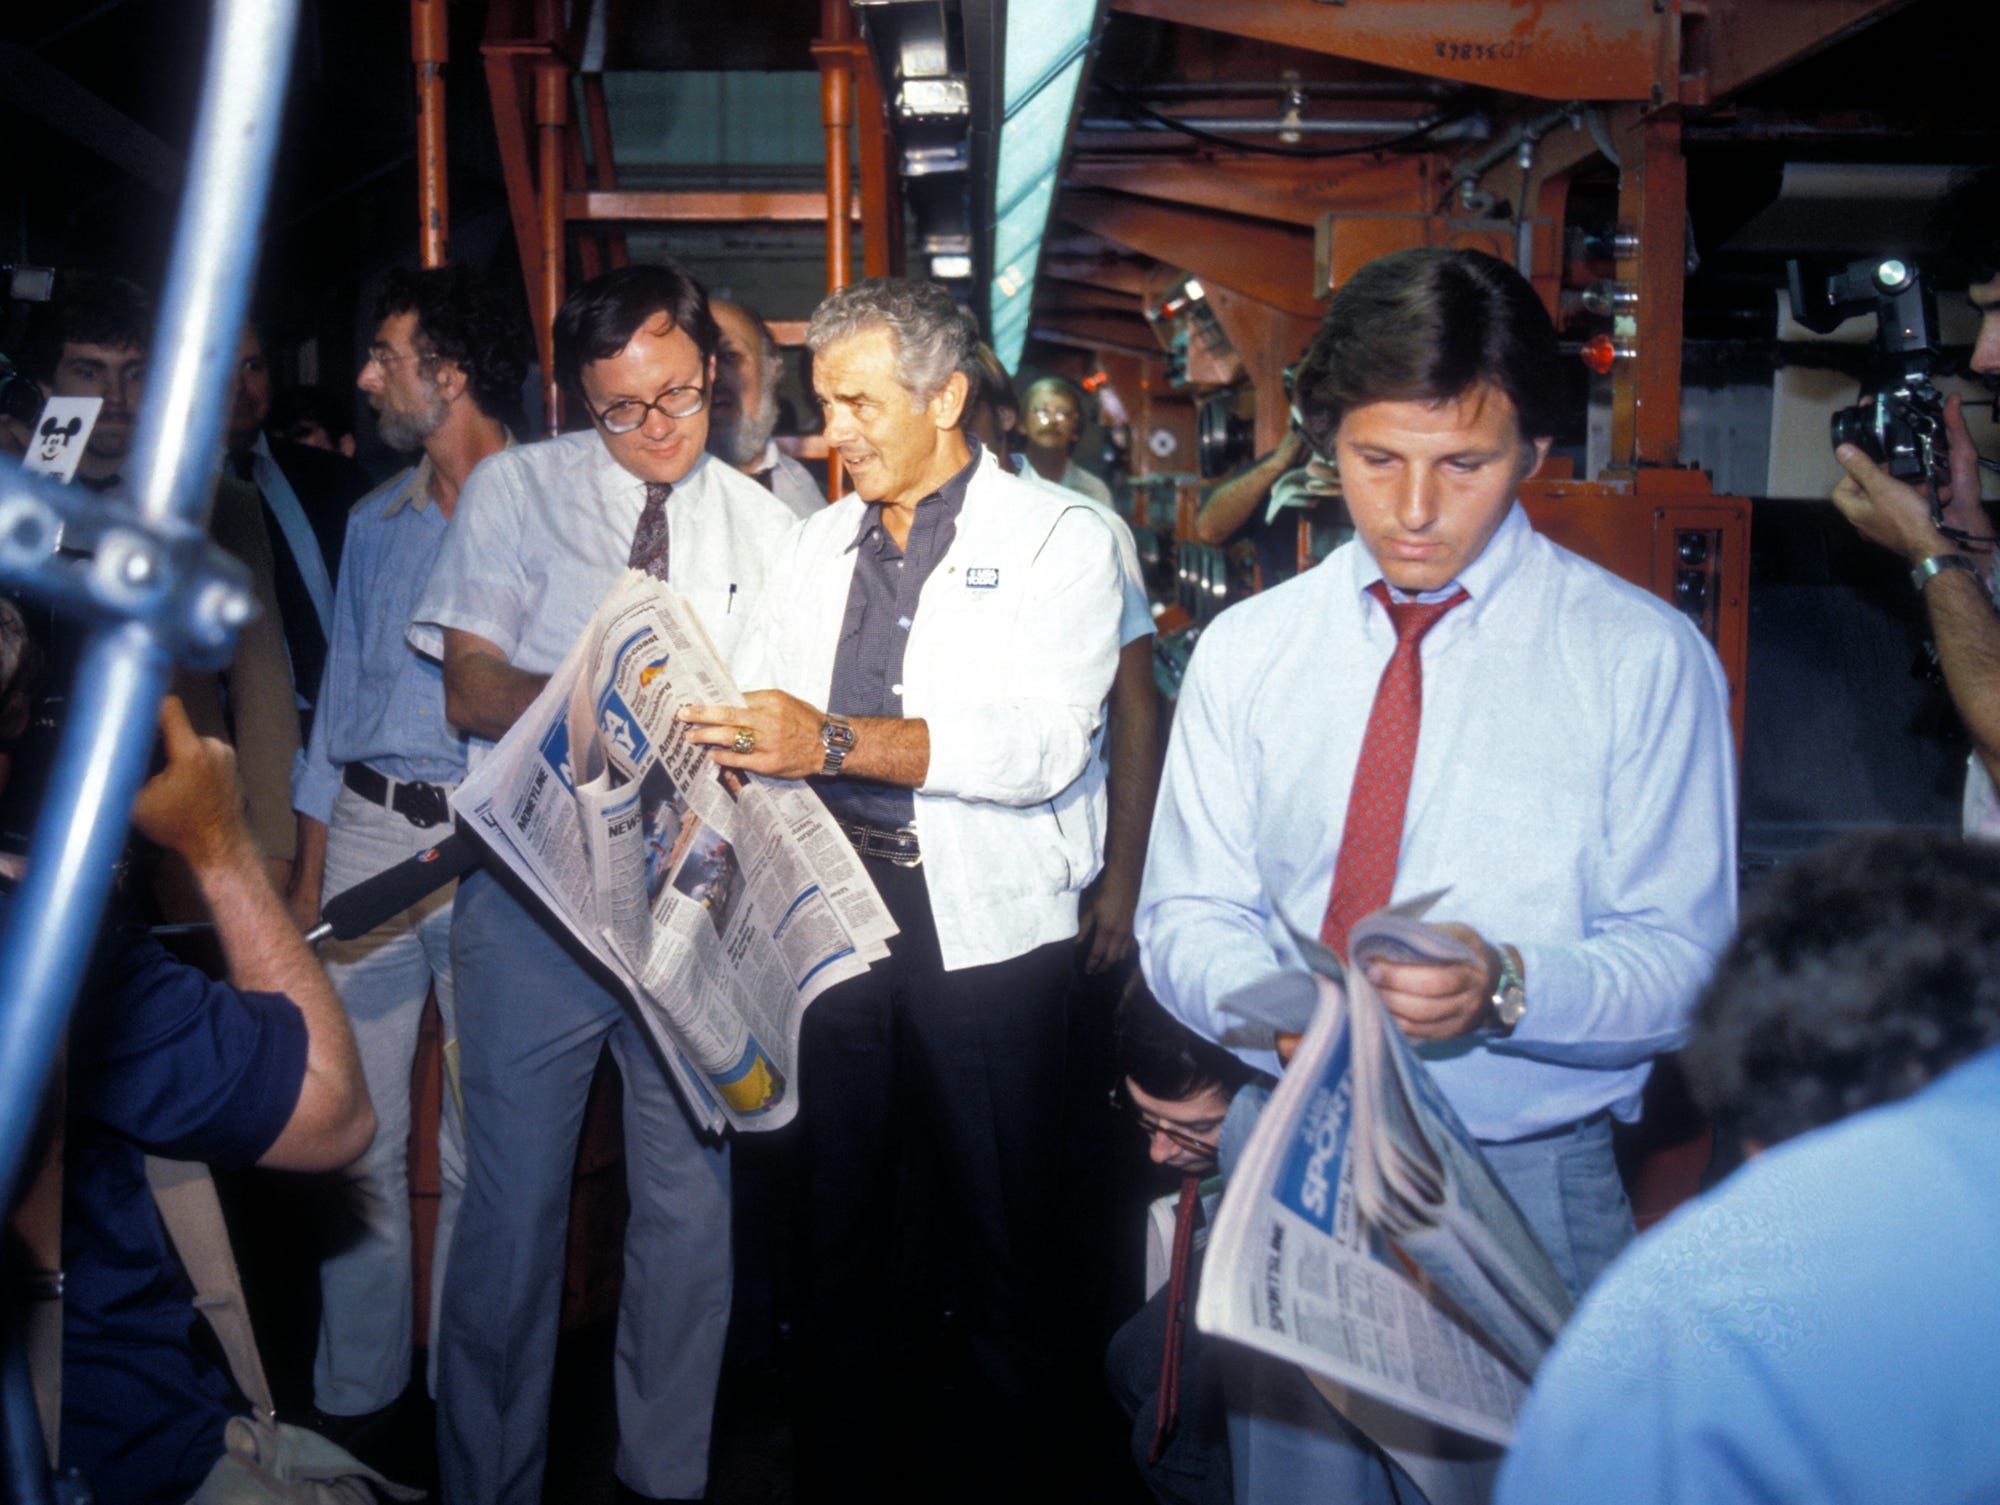 Al Neuharth, center, welcomes the first edition of USA TODAY as it rolls off the presses in Springfield, Va., on the night of Sept. 14, 1982.